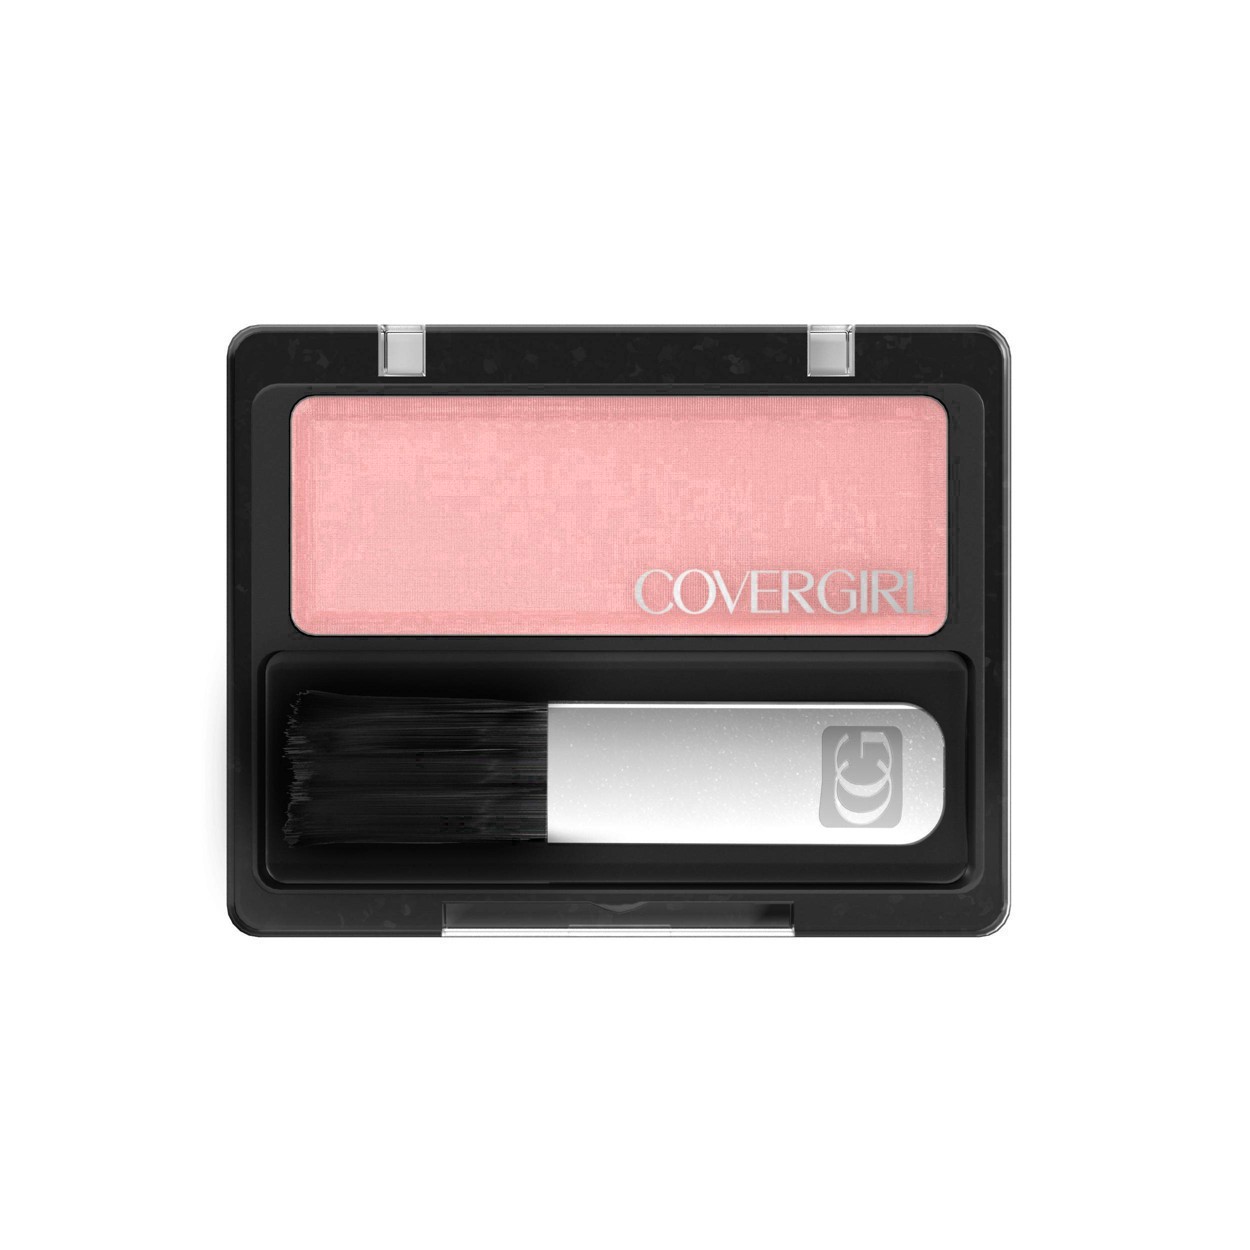 slide 11 of 42, Covergirl COVERGIRL Classic Color Blush Rose Silk, 1 ct